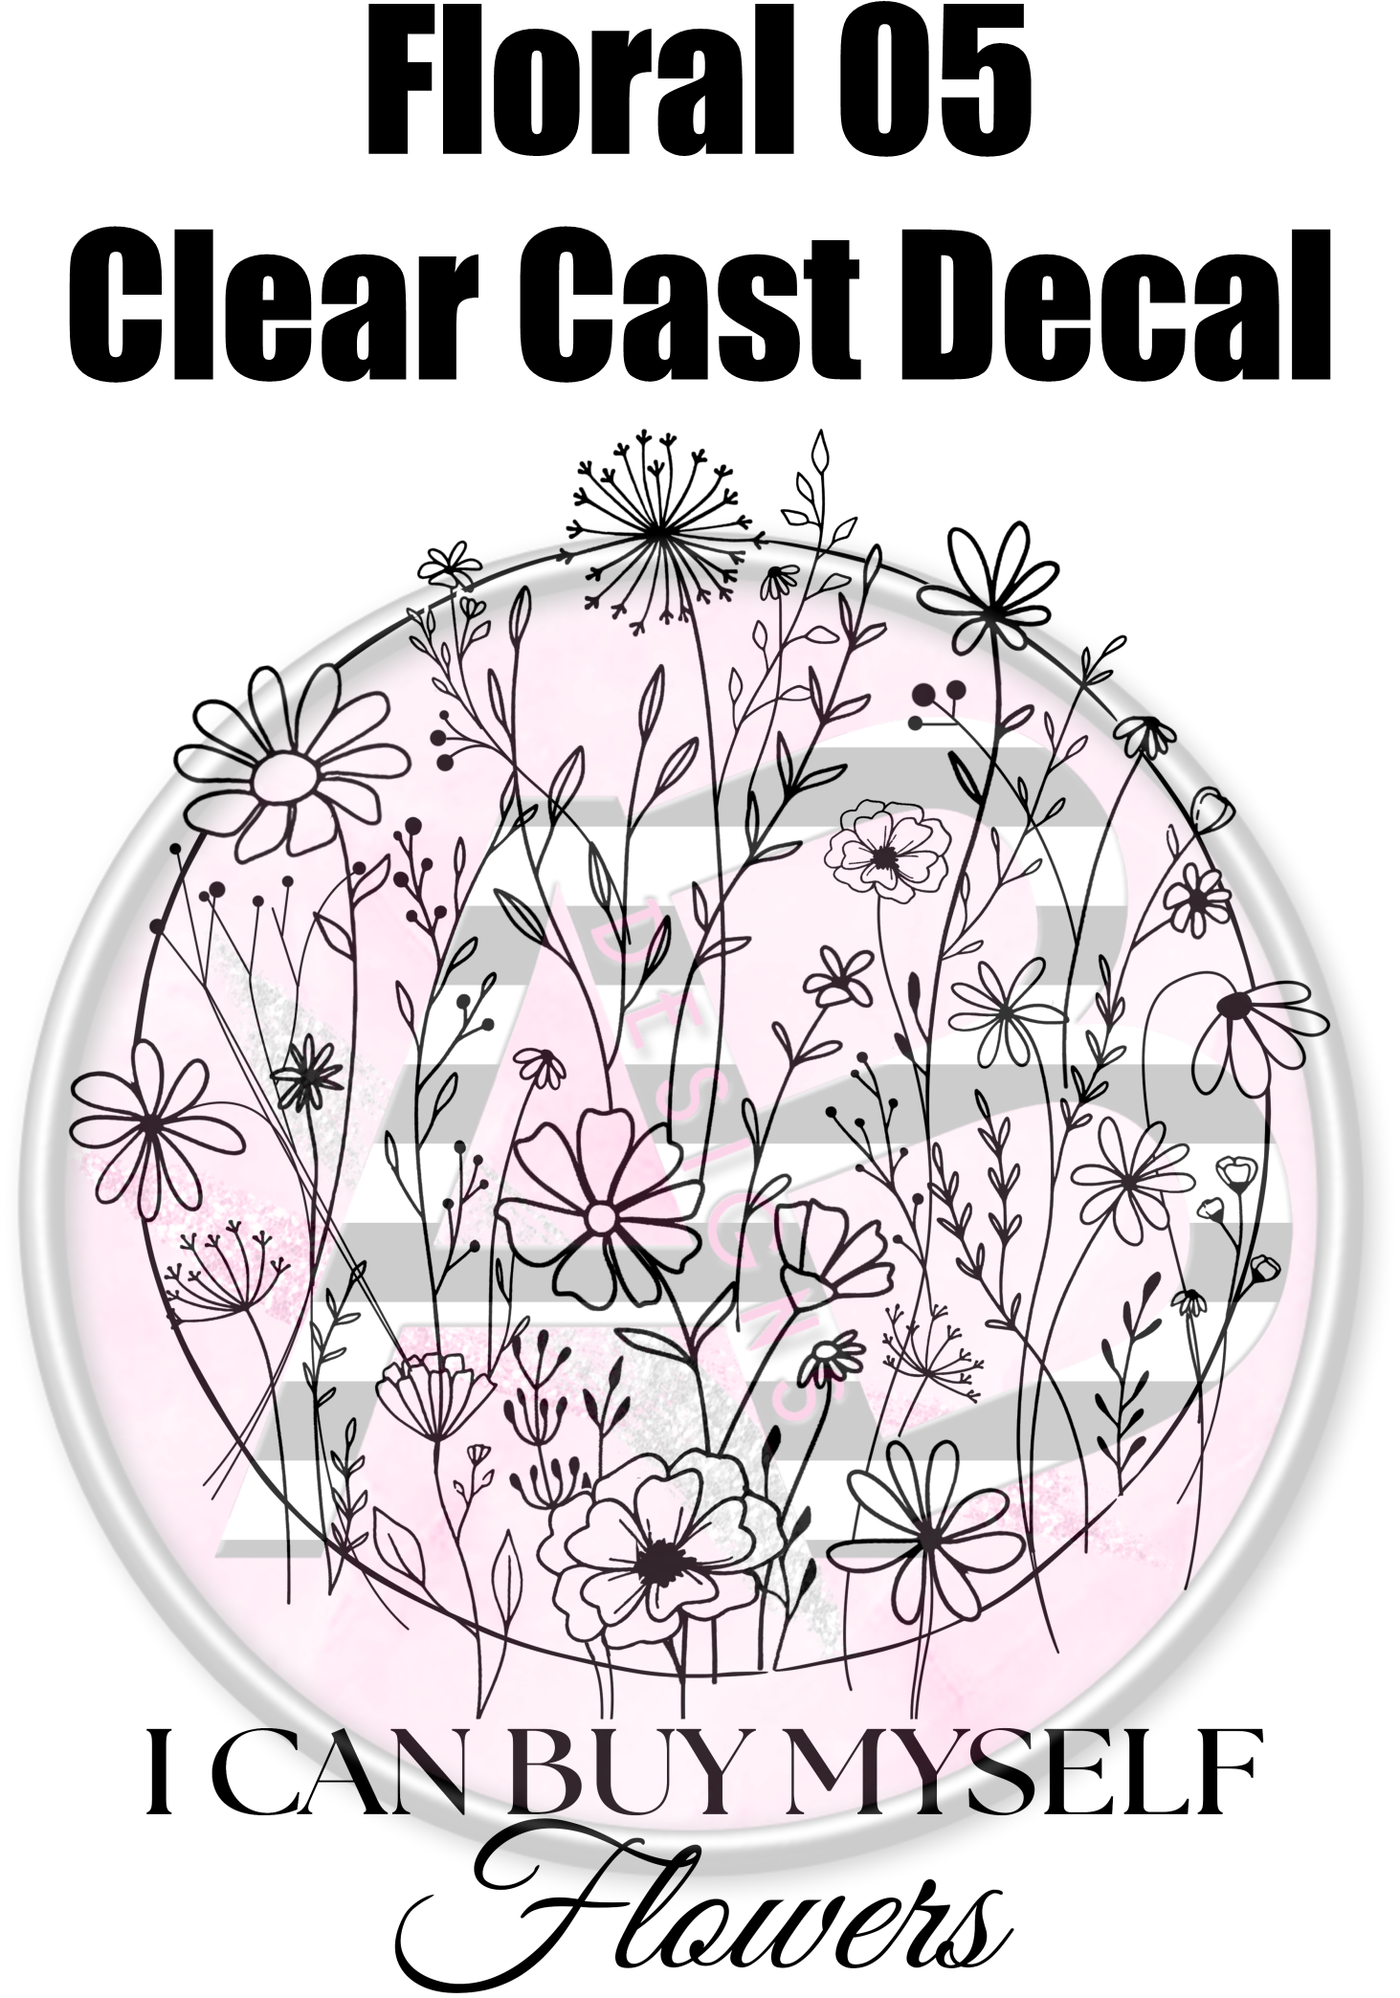 Floral 05 - Clear Cast Decal